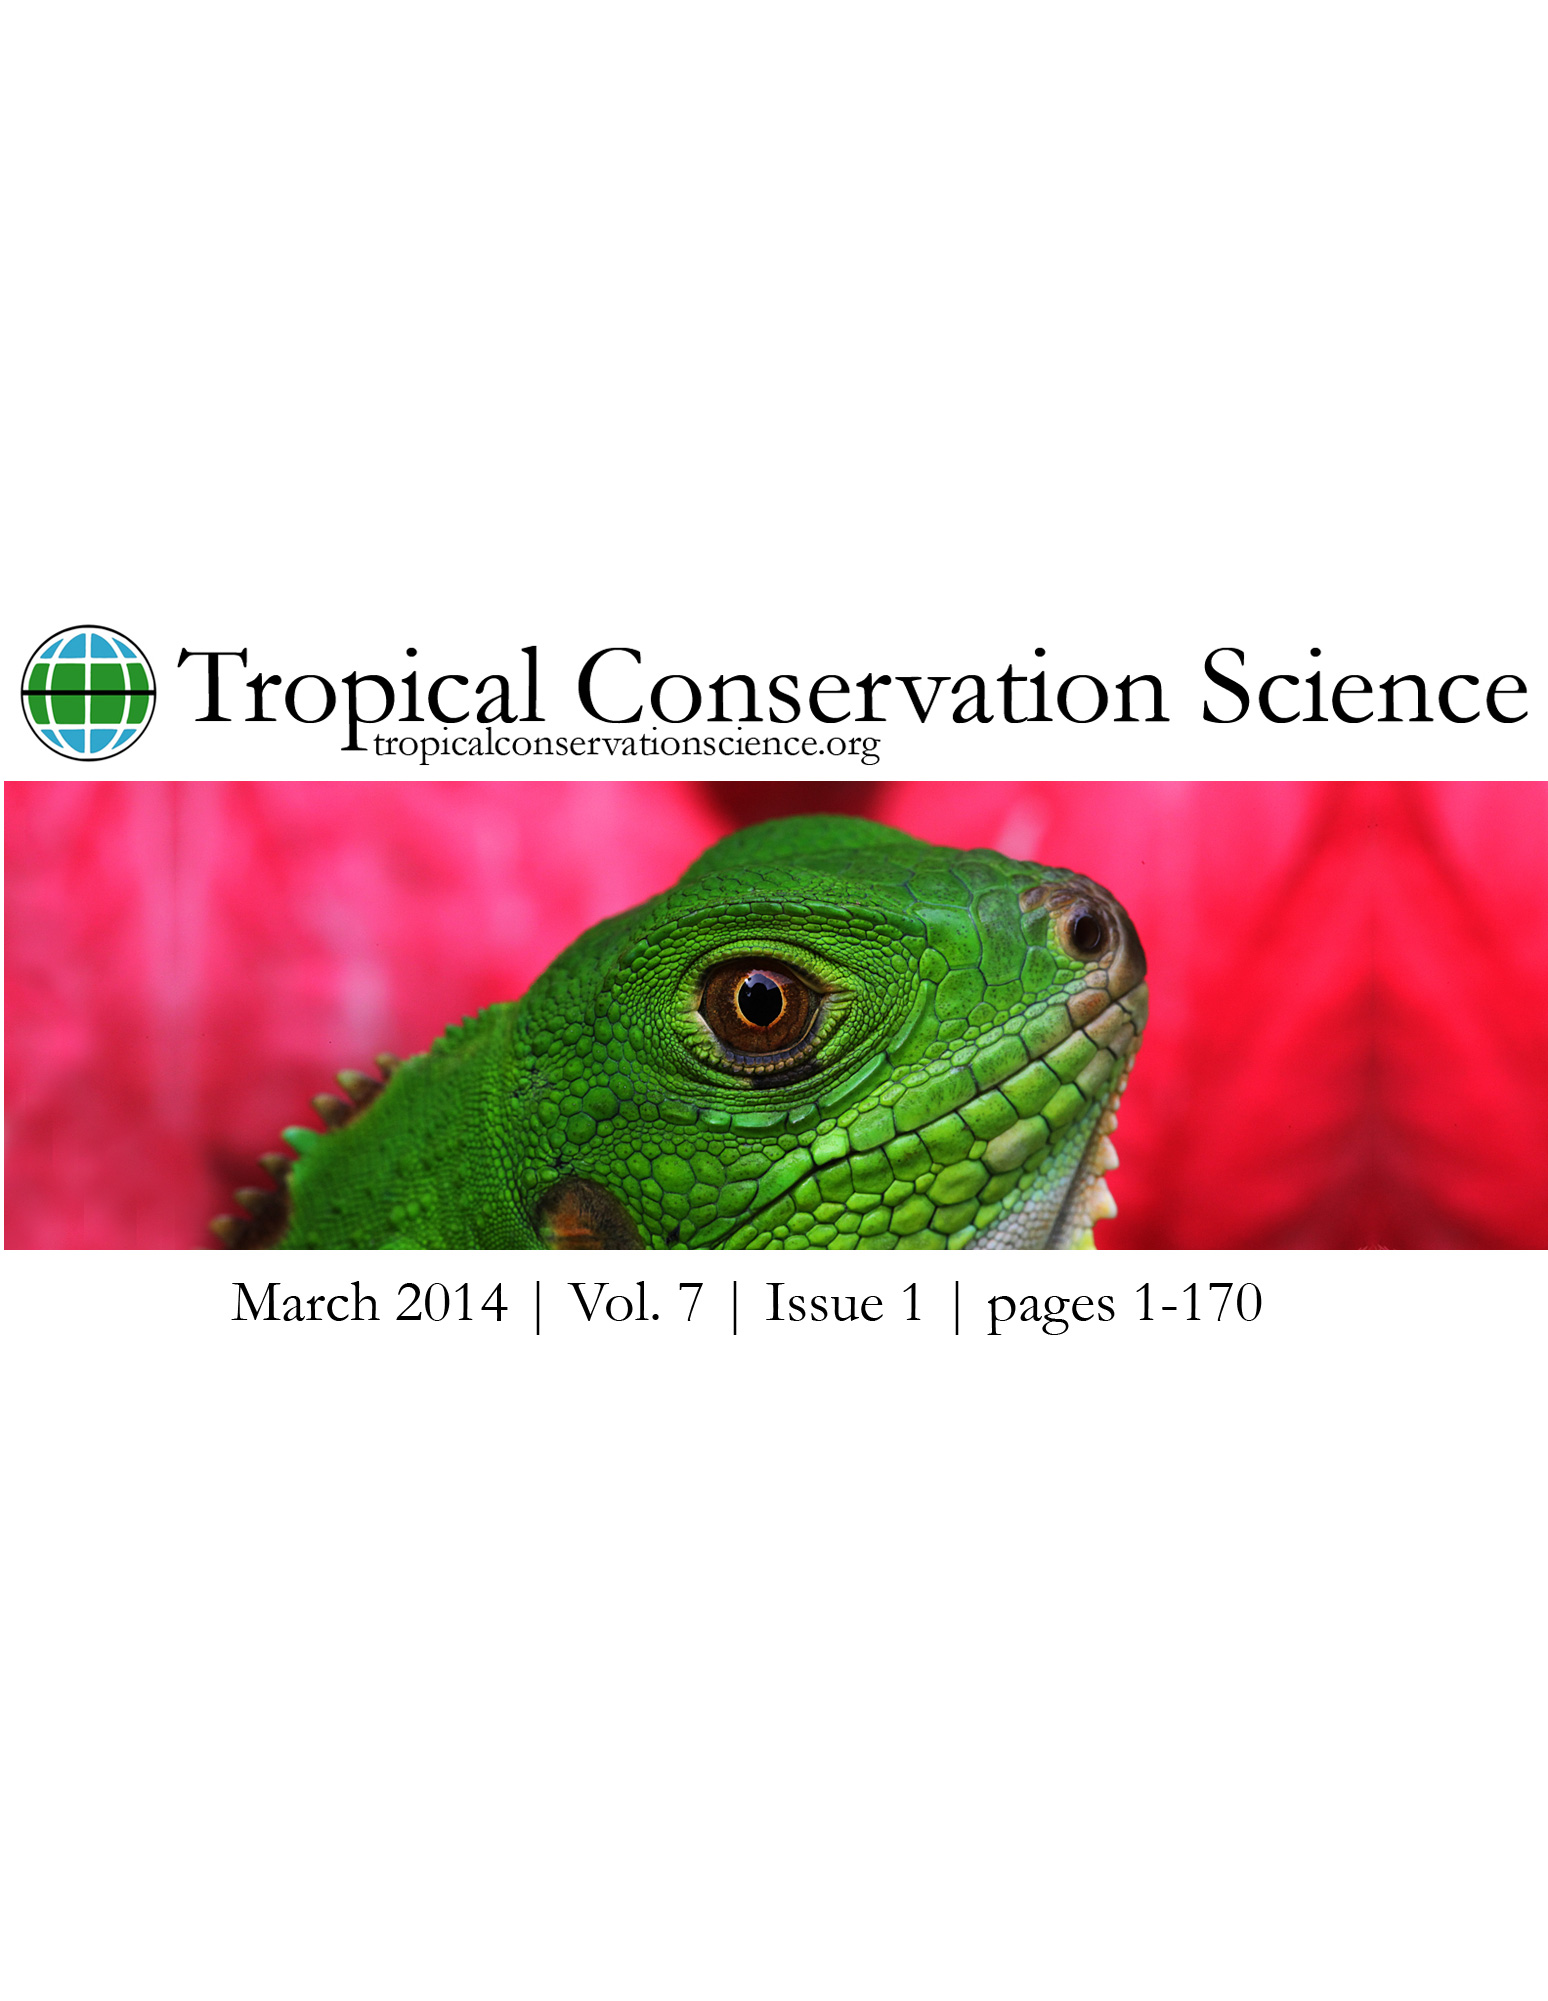 Tropical Conservation Science  March 2014 issue